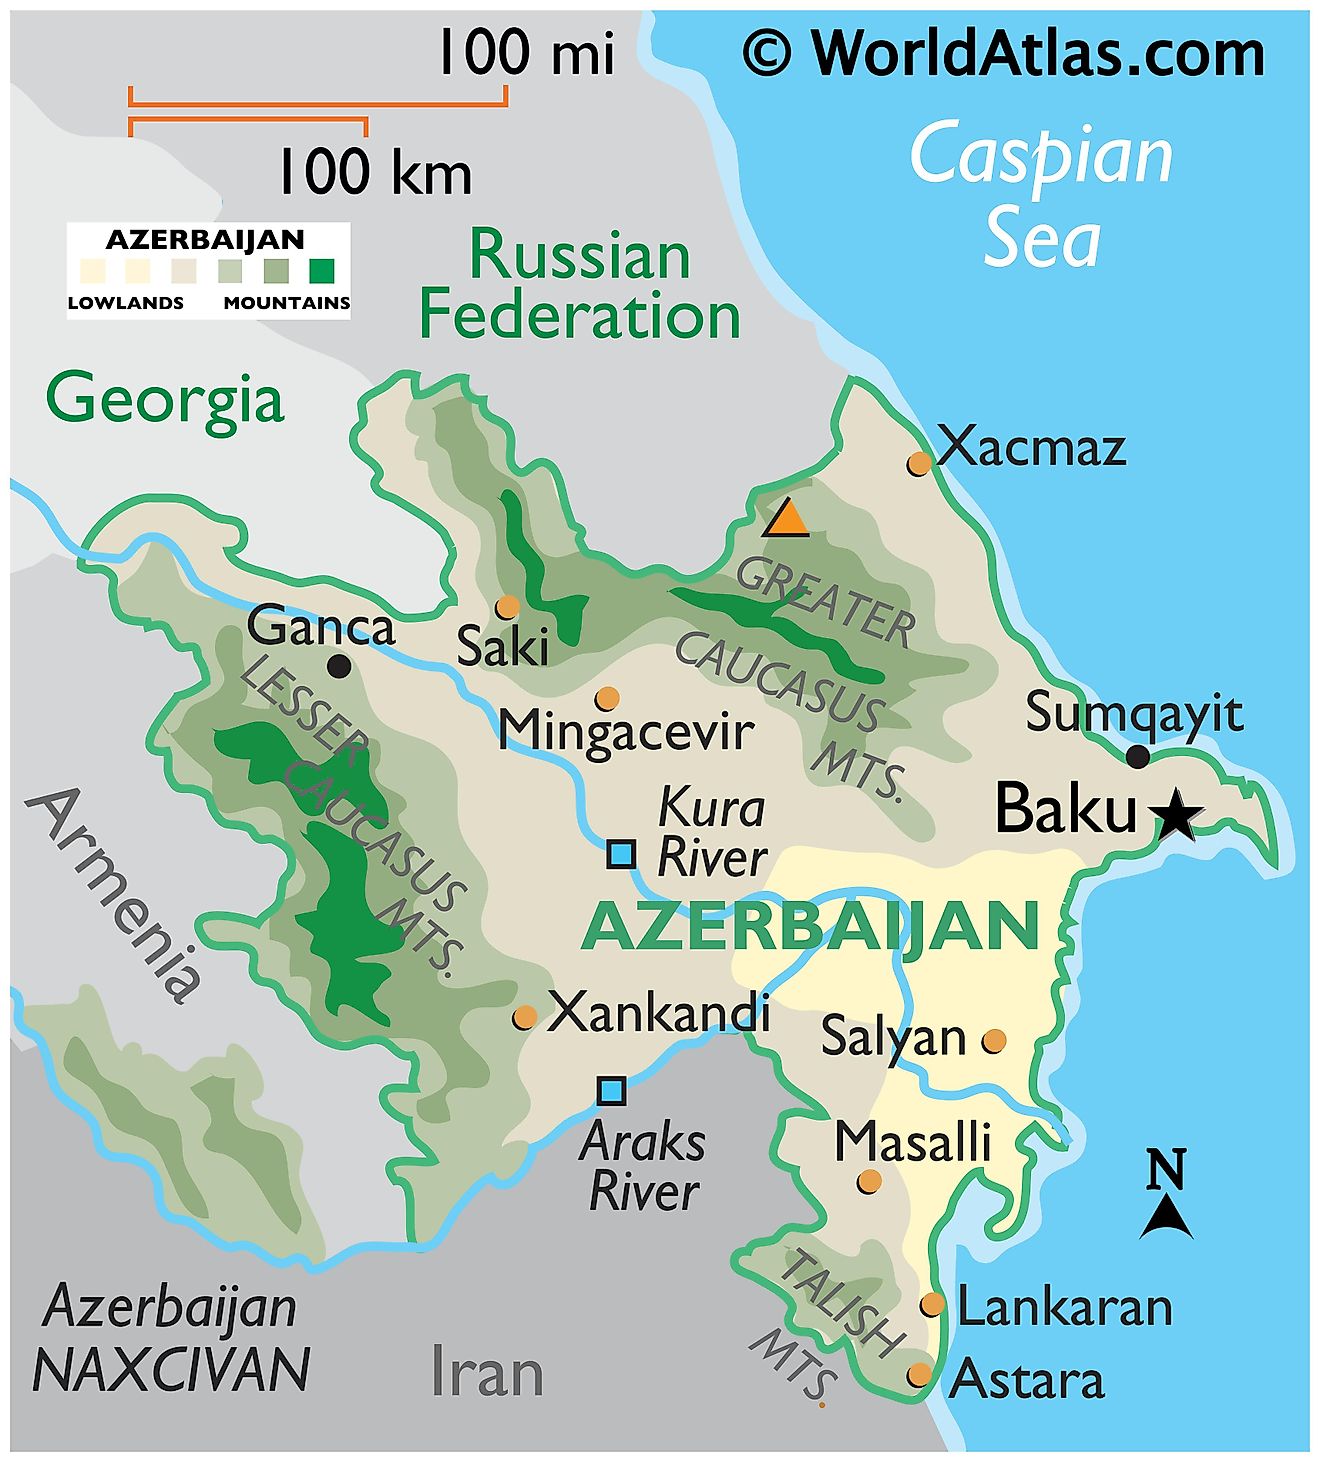 Physical Map of Azerbaijan showing state boundaries, relief, major rivers, mountain ranges, important cities, etc.